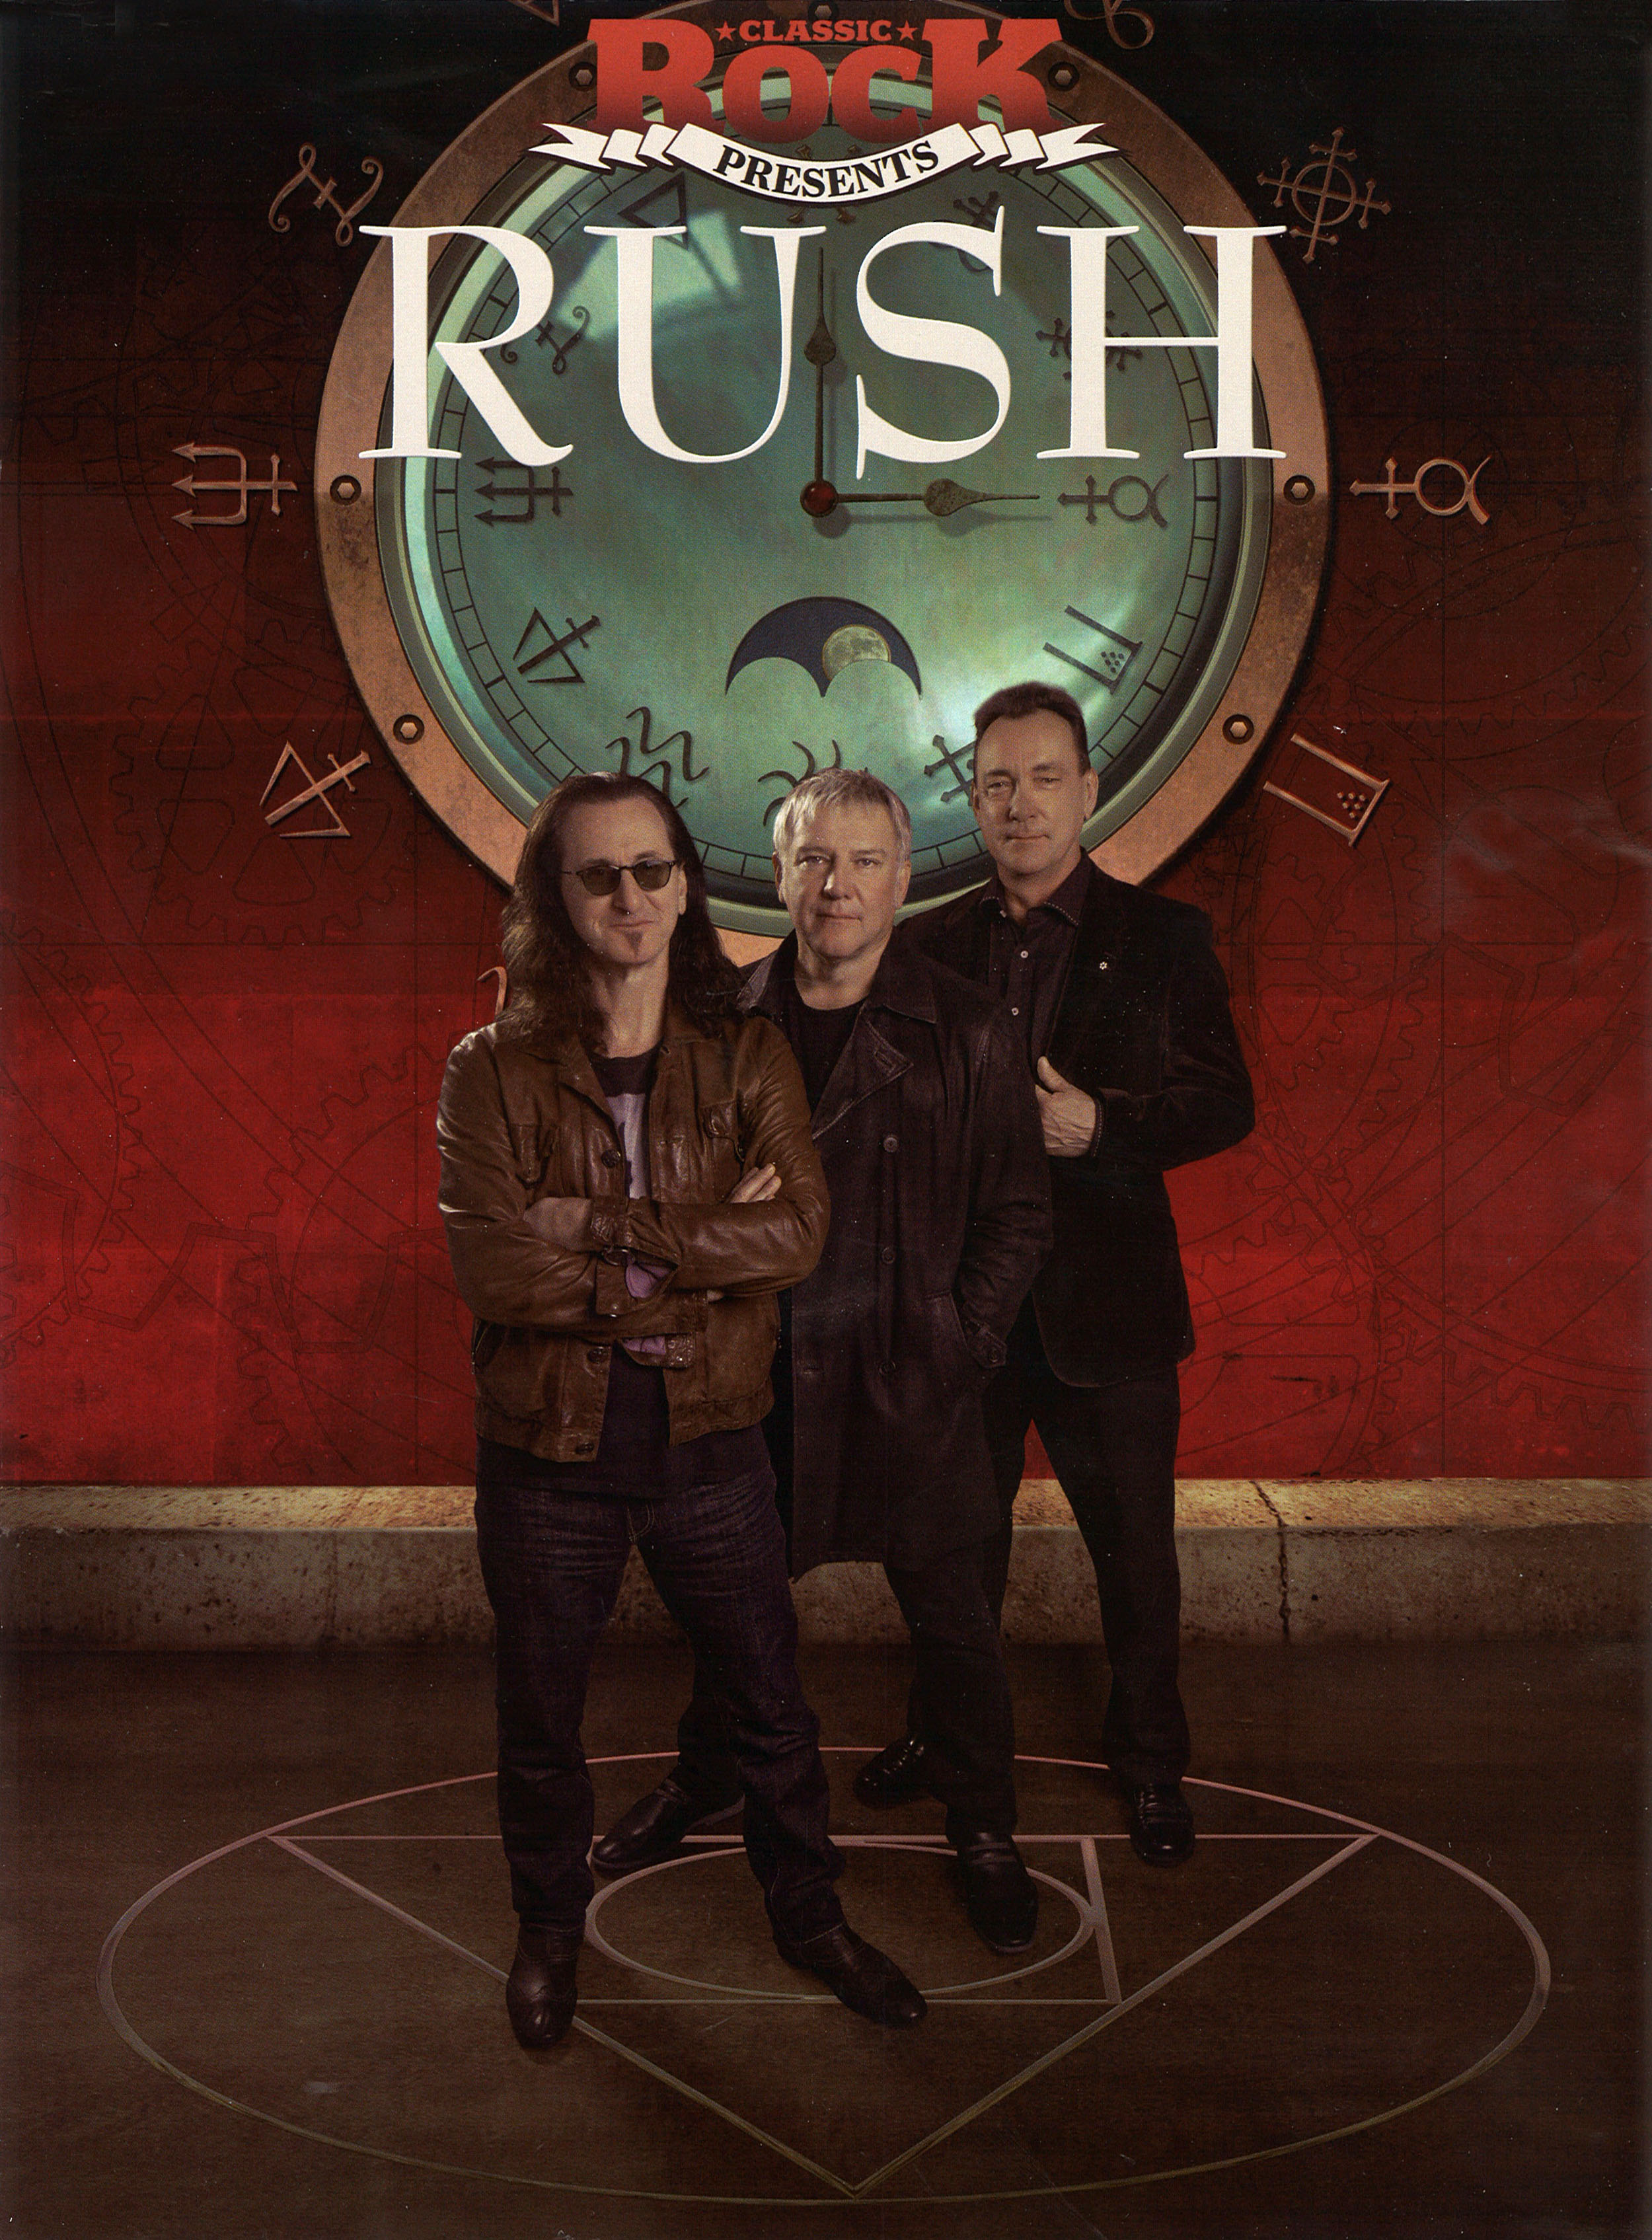 Rush: The Early Years Collection - 5 Studio Albums (Rush / Fly By Night /  Caress of Steel / 2112 / A Farewell To Kings) + Bonus Art Card